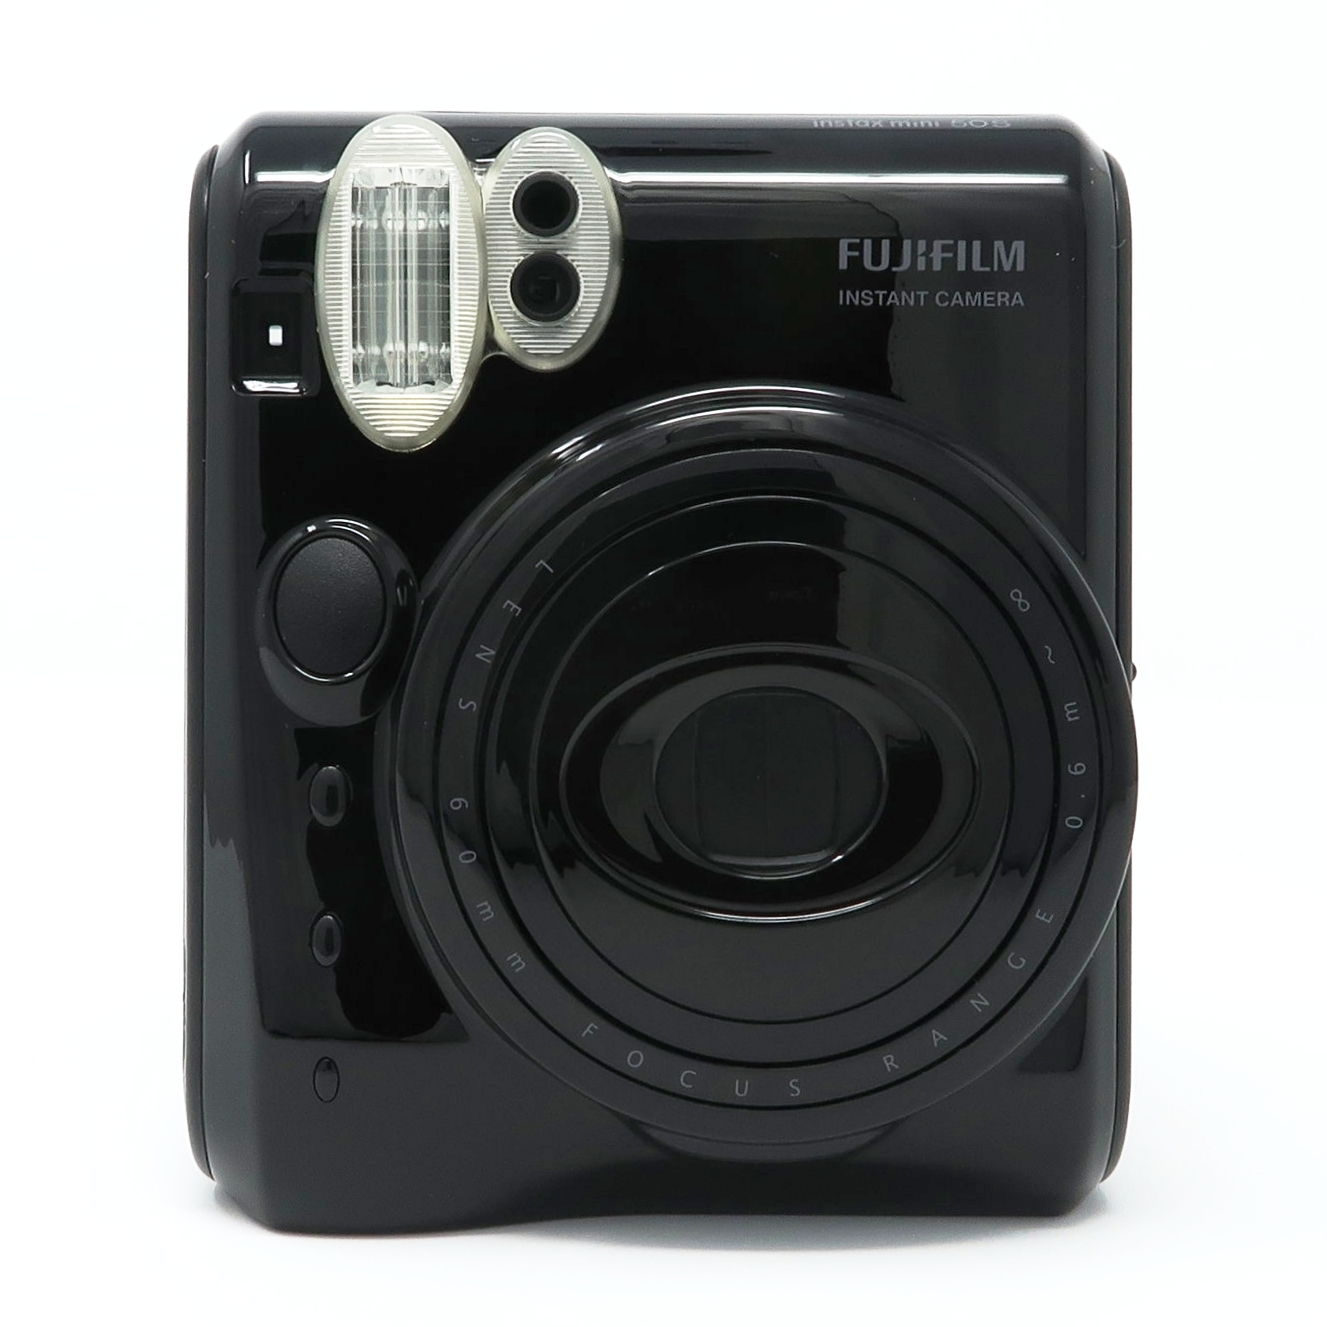 Kardinaal Nat Voordracht Fujifilm Instax Mini 50S Camera Review & How To Guide — EVERYTHING INSTAX -  Instax Camera Reviews & More